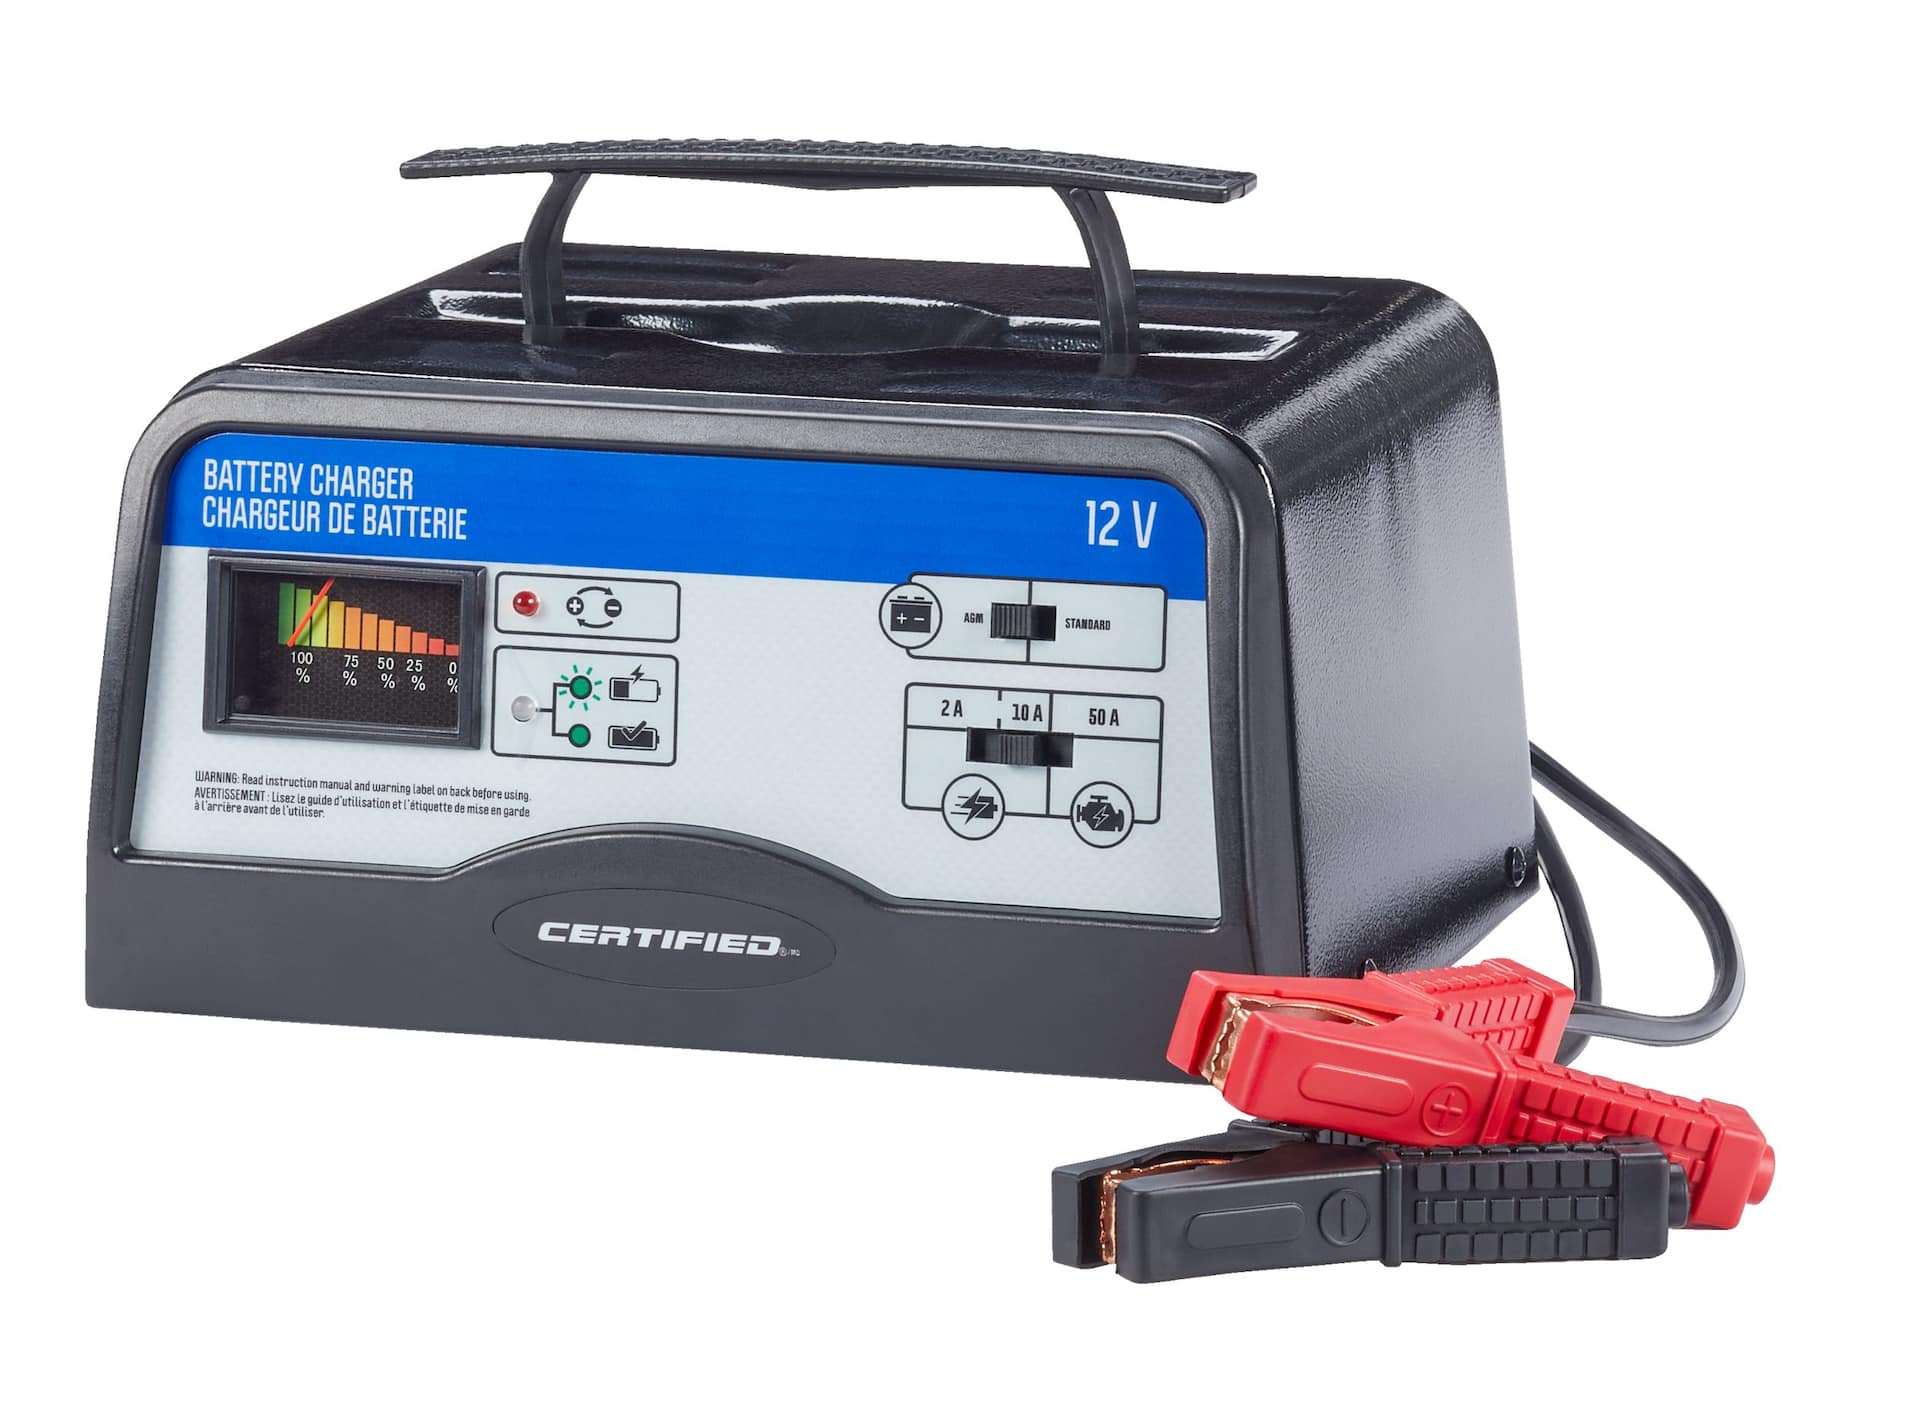 Certified Battery Charger, Fully Automatic, 10/2-Amp, 12V, with 50